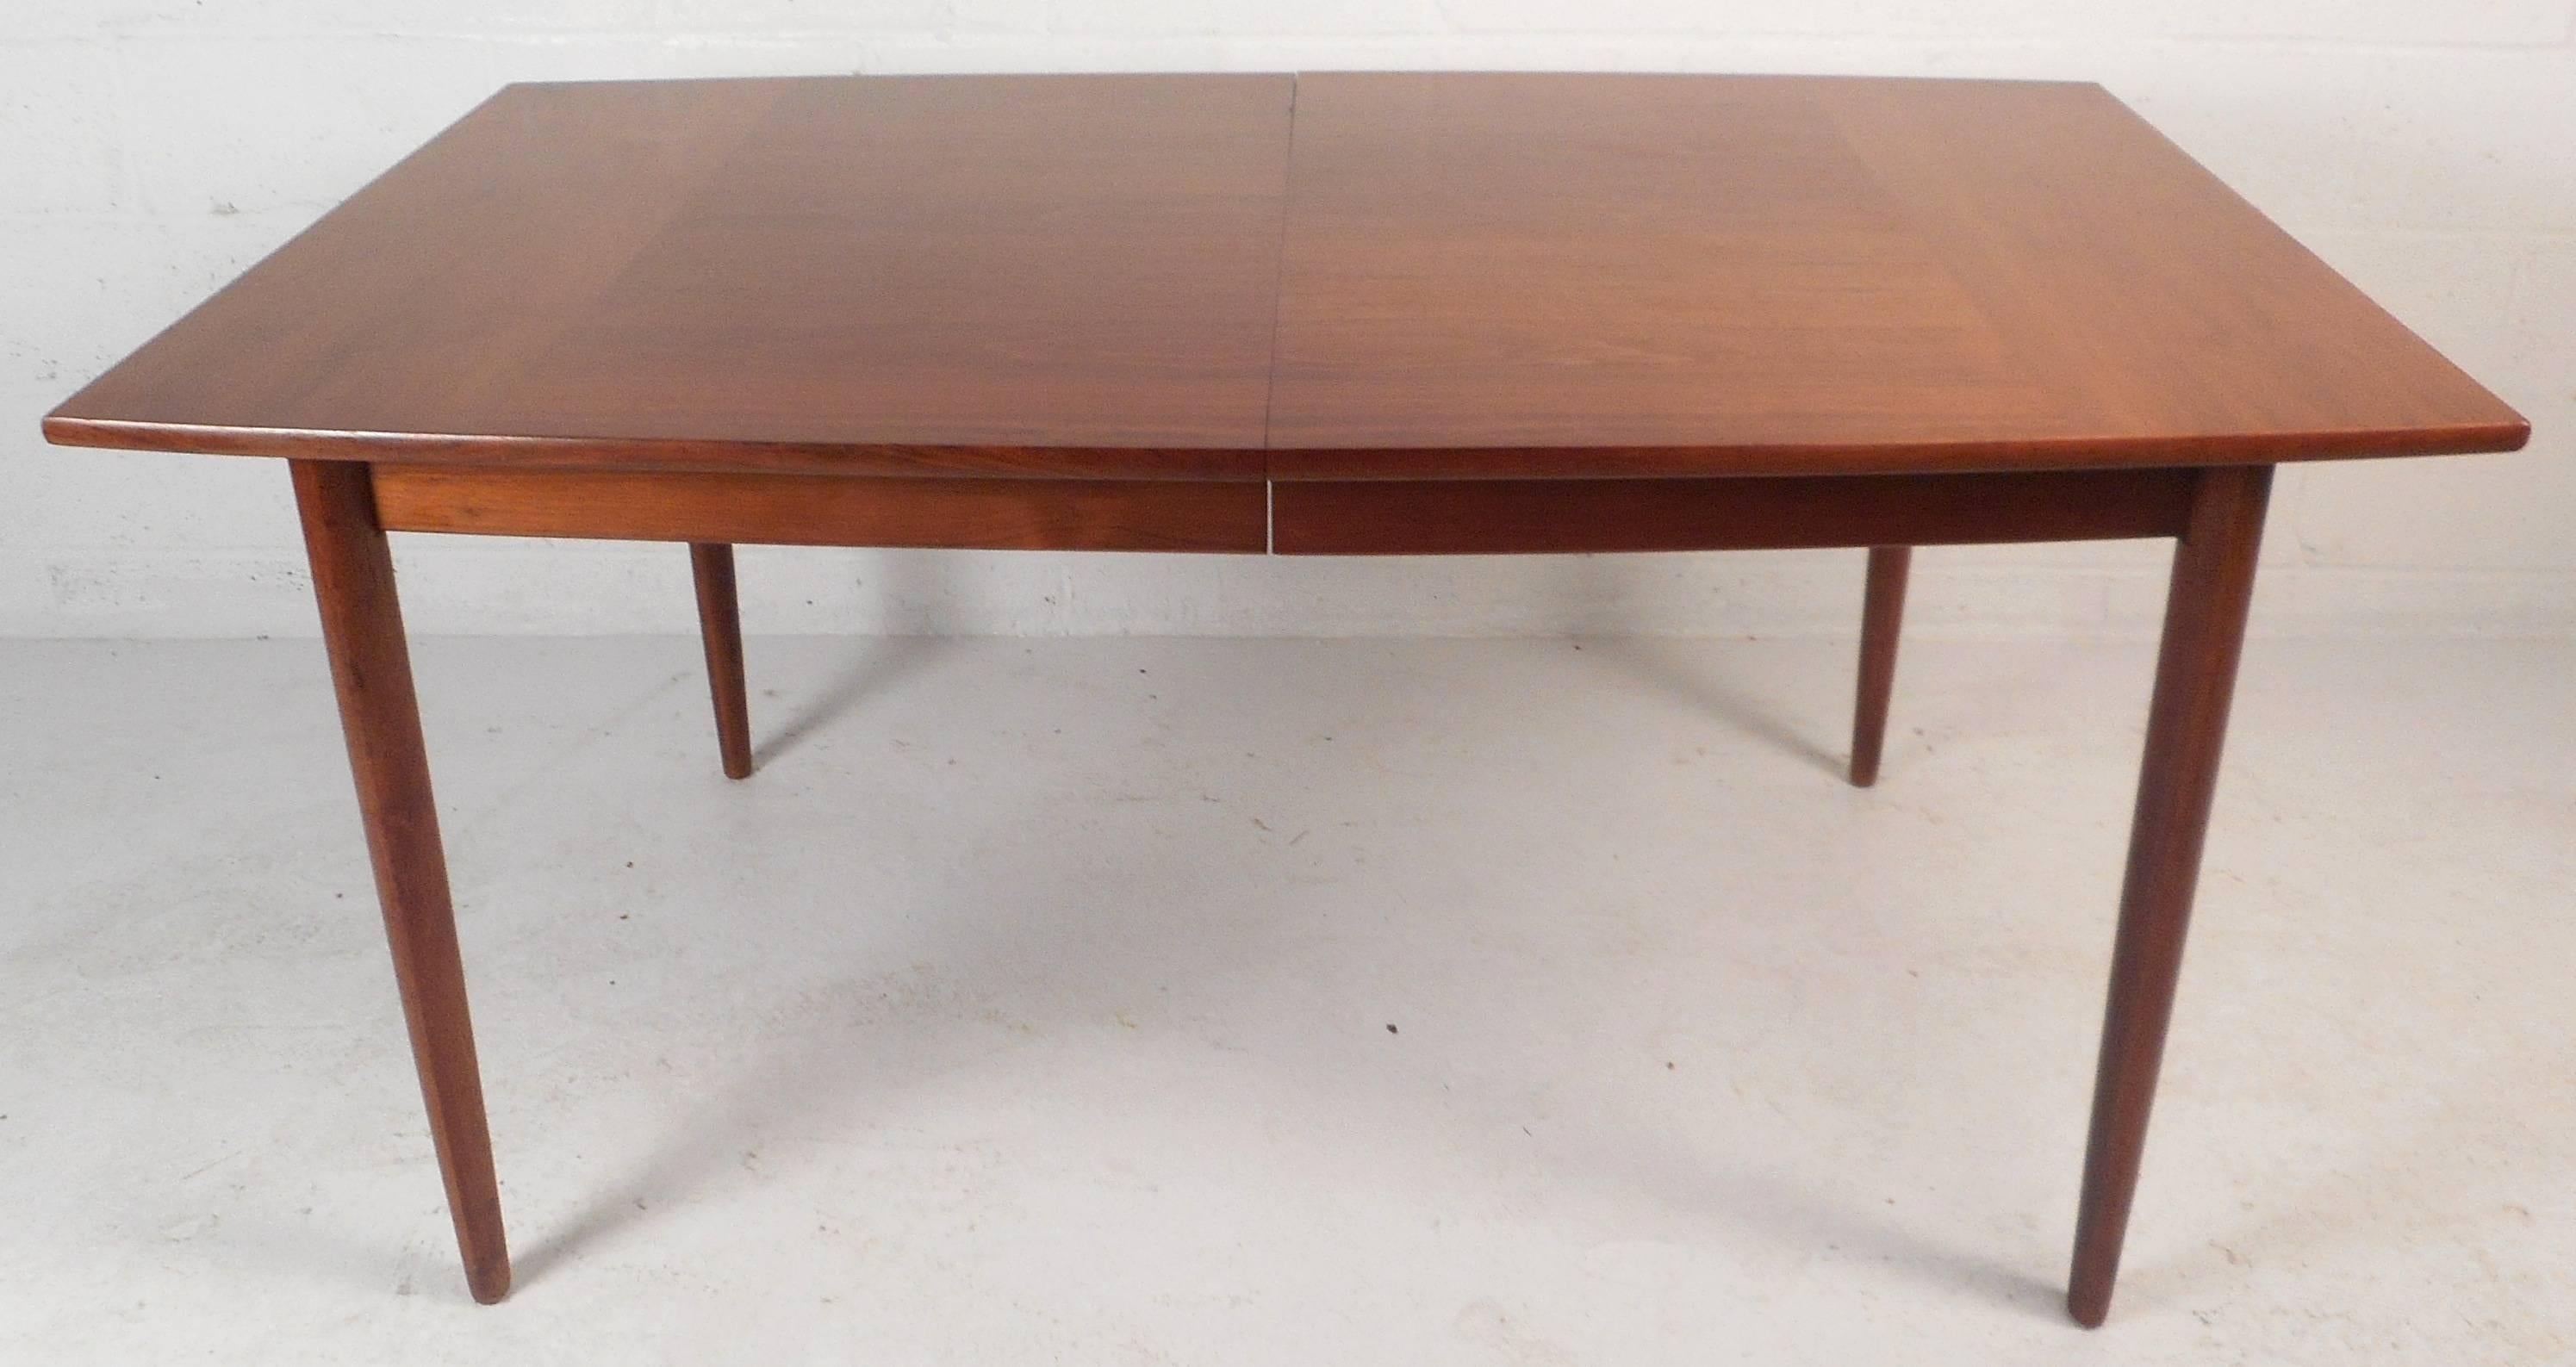 This stunning vintage modern dining table by Drexel features a unique sculpted top with tapered legs. Quality construction with beautiful walnut wood grain. This elegant Mid-Century dining table is sure to compliment any modern interior. Please